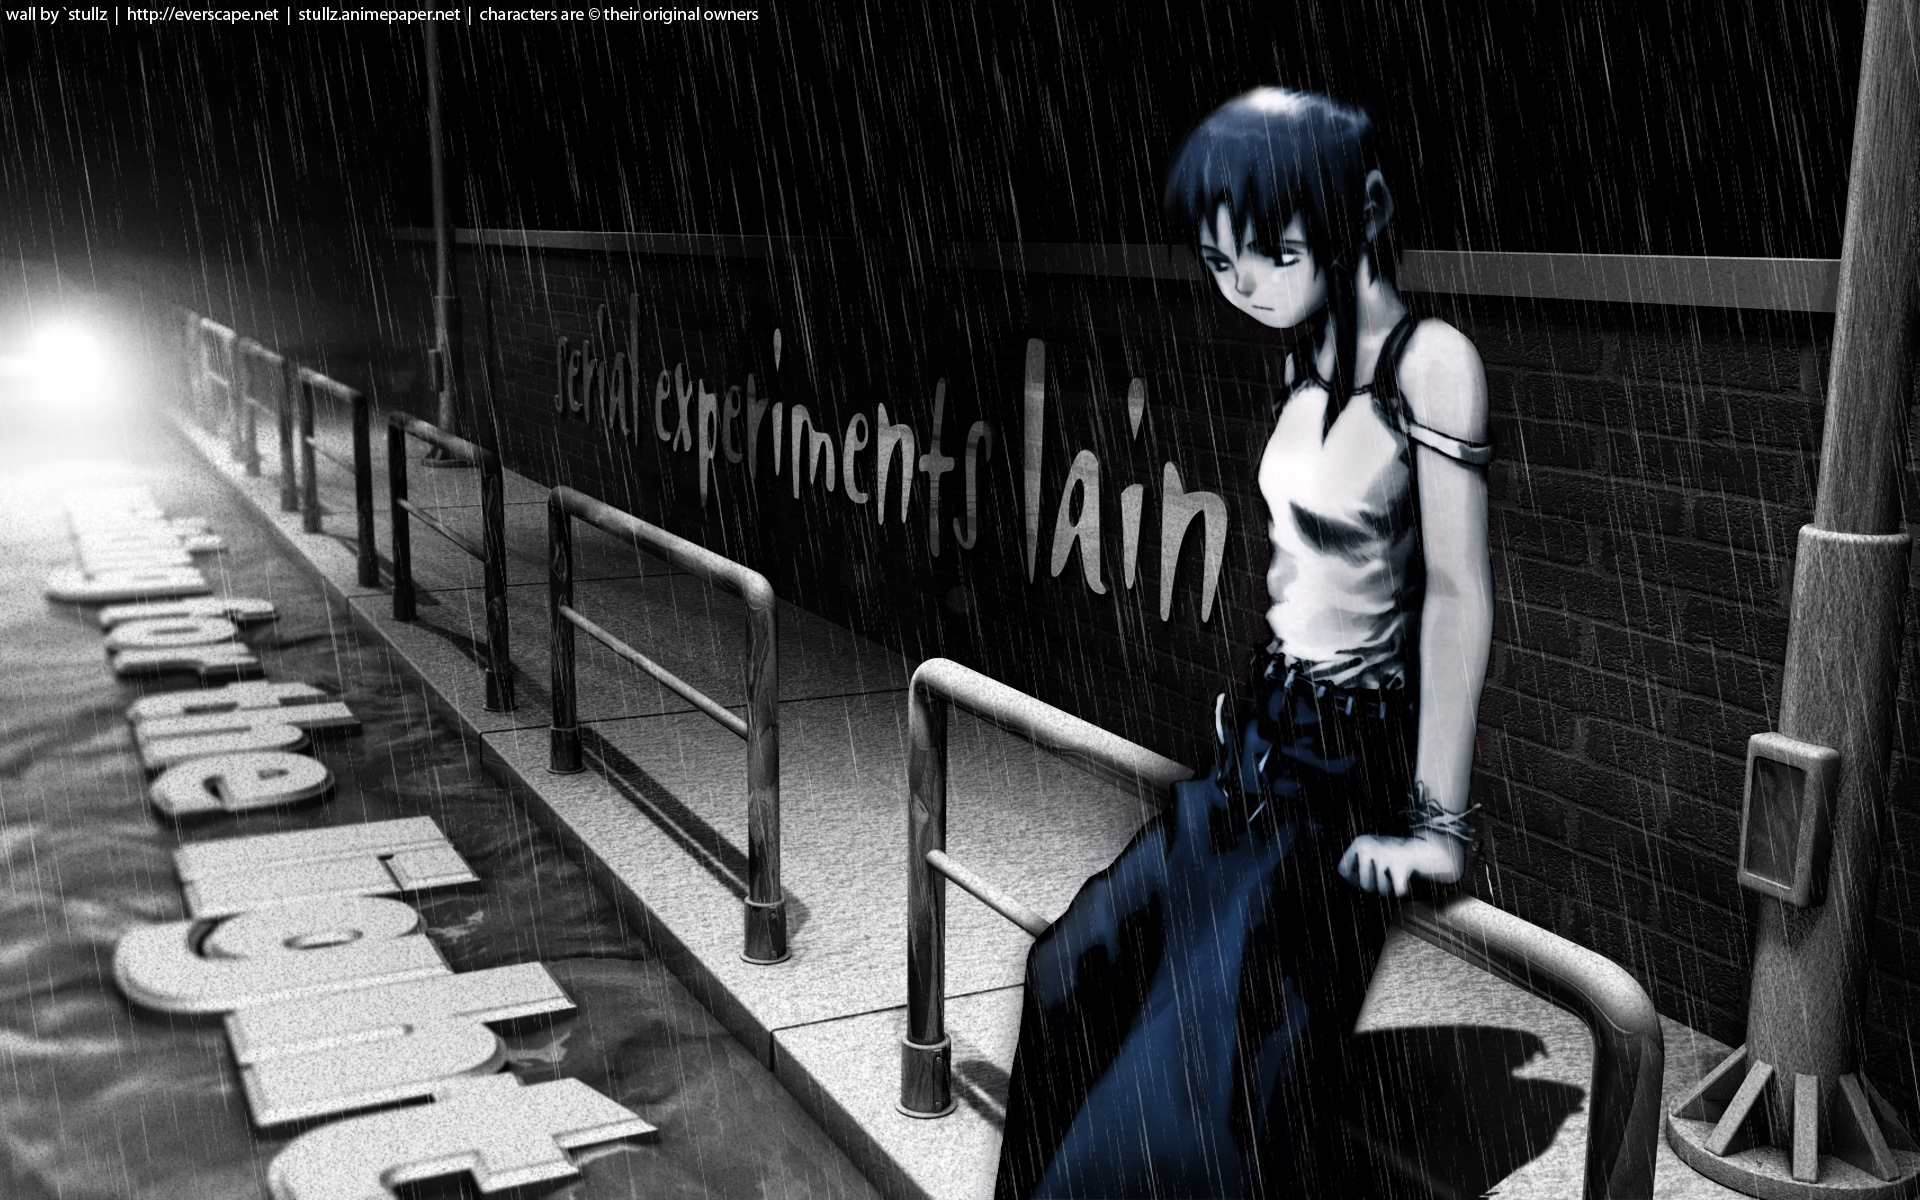 serial experiments lain wallpaper,snapshot,cartoon,monochrome,animation,black and white